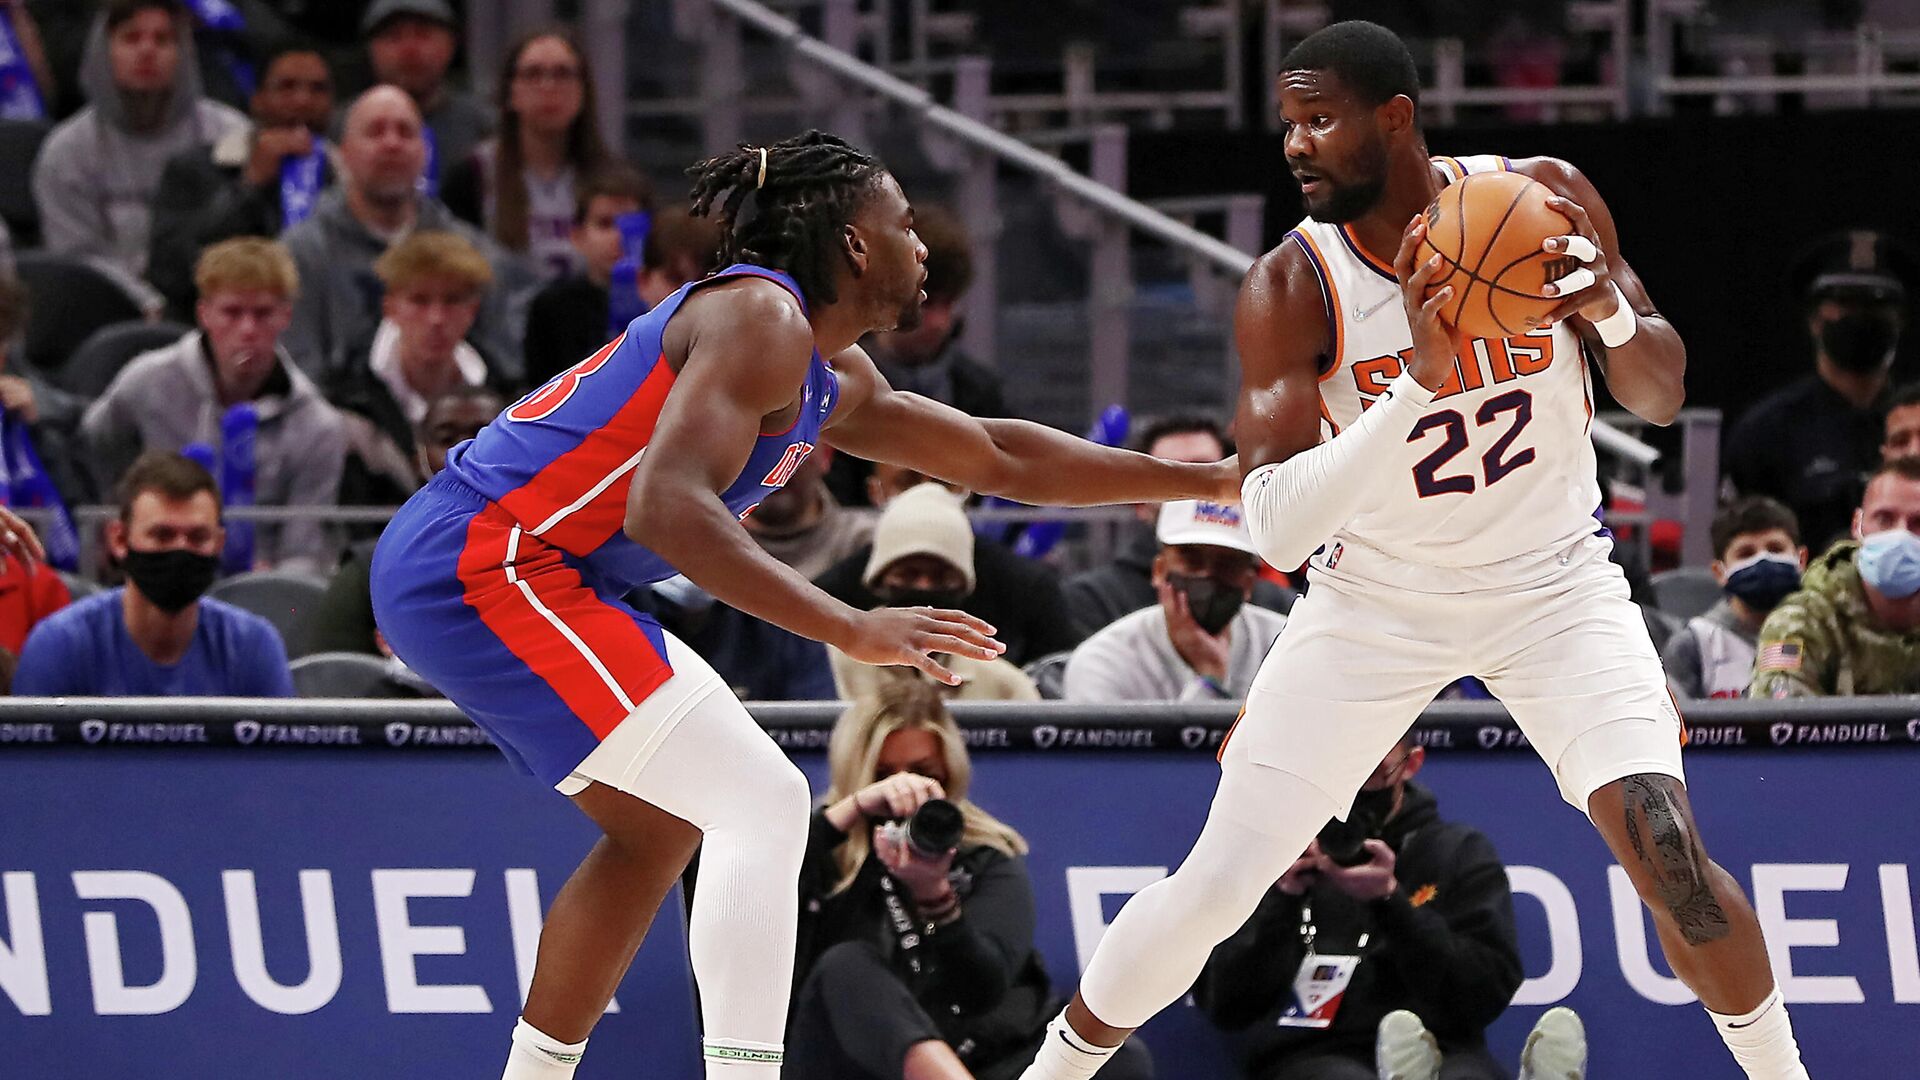 DETROIT, MICHIGAN - JANUARY 16: Deandre Ayton #22 of the Phoenix Suns looks to drive against Isaiah Stewart #28 of the Detroit Pistons at Little Caesars Arena on January 16, 2022 in Detroit, Michigan. NOTE TO USER: User expressly acknowledges and agrees that, by downloading and or using this photograph, user is consenting to the terms and conditions of the Getty Images License Agreement.   Mike Mulholland/Getty Images/AFP (Photo by Mike Mulholland / GETTY IMAGES NORTH AMERICA / Getty Images via AFP) - РИА Новости, 1920, 16.01.2022